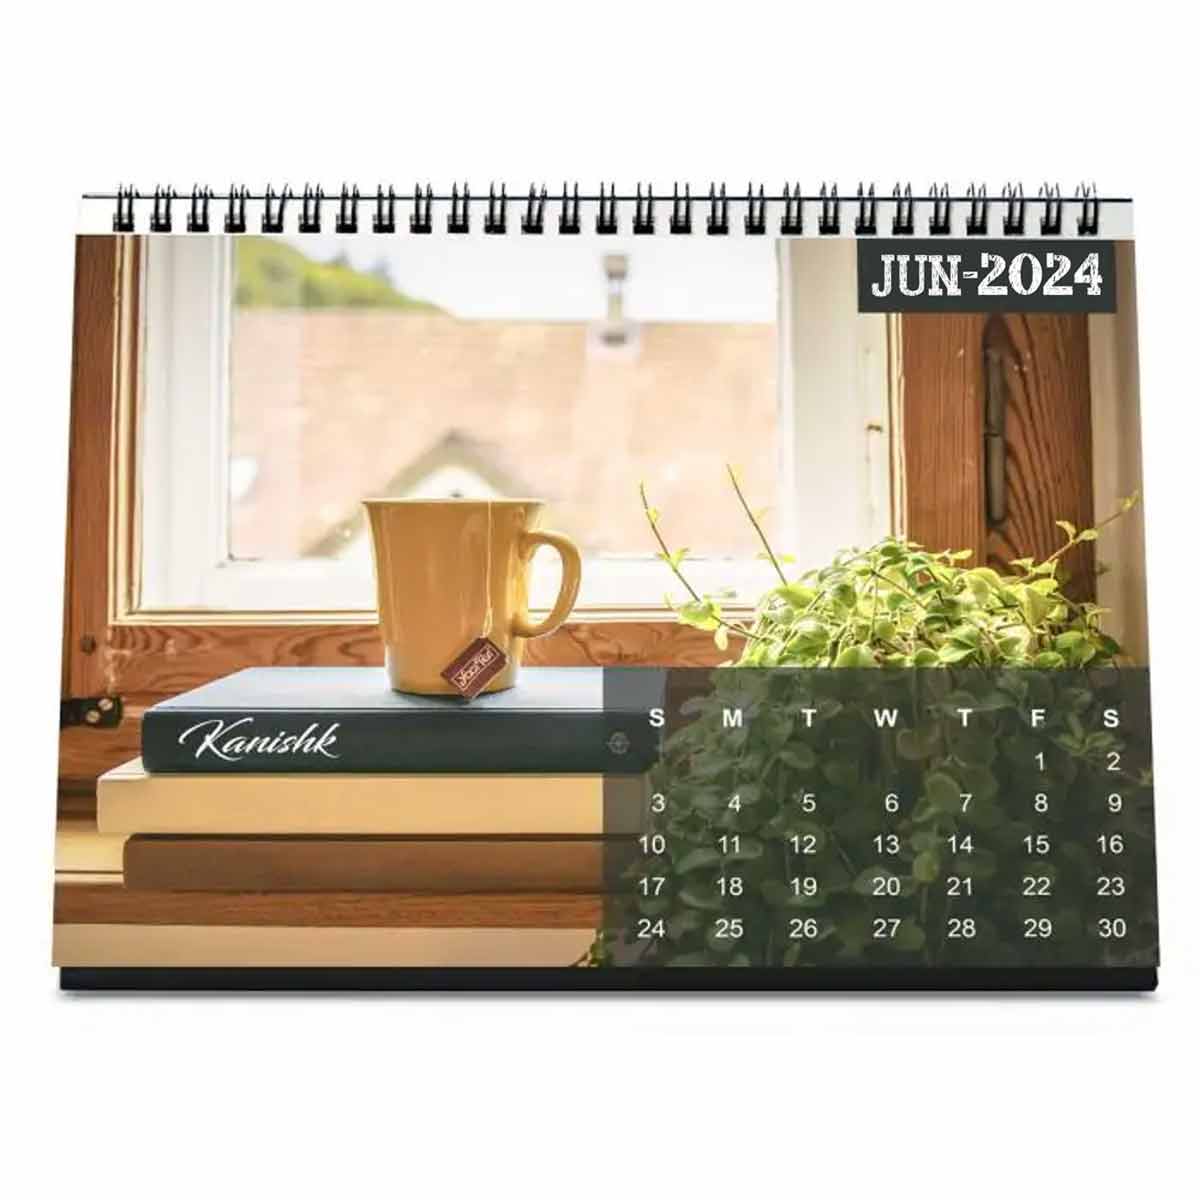 Nature Themed Personalised Calendar